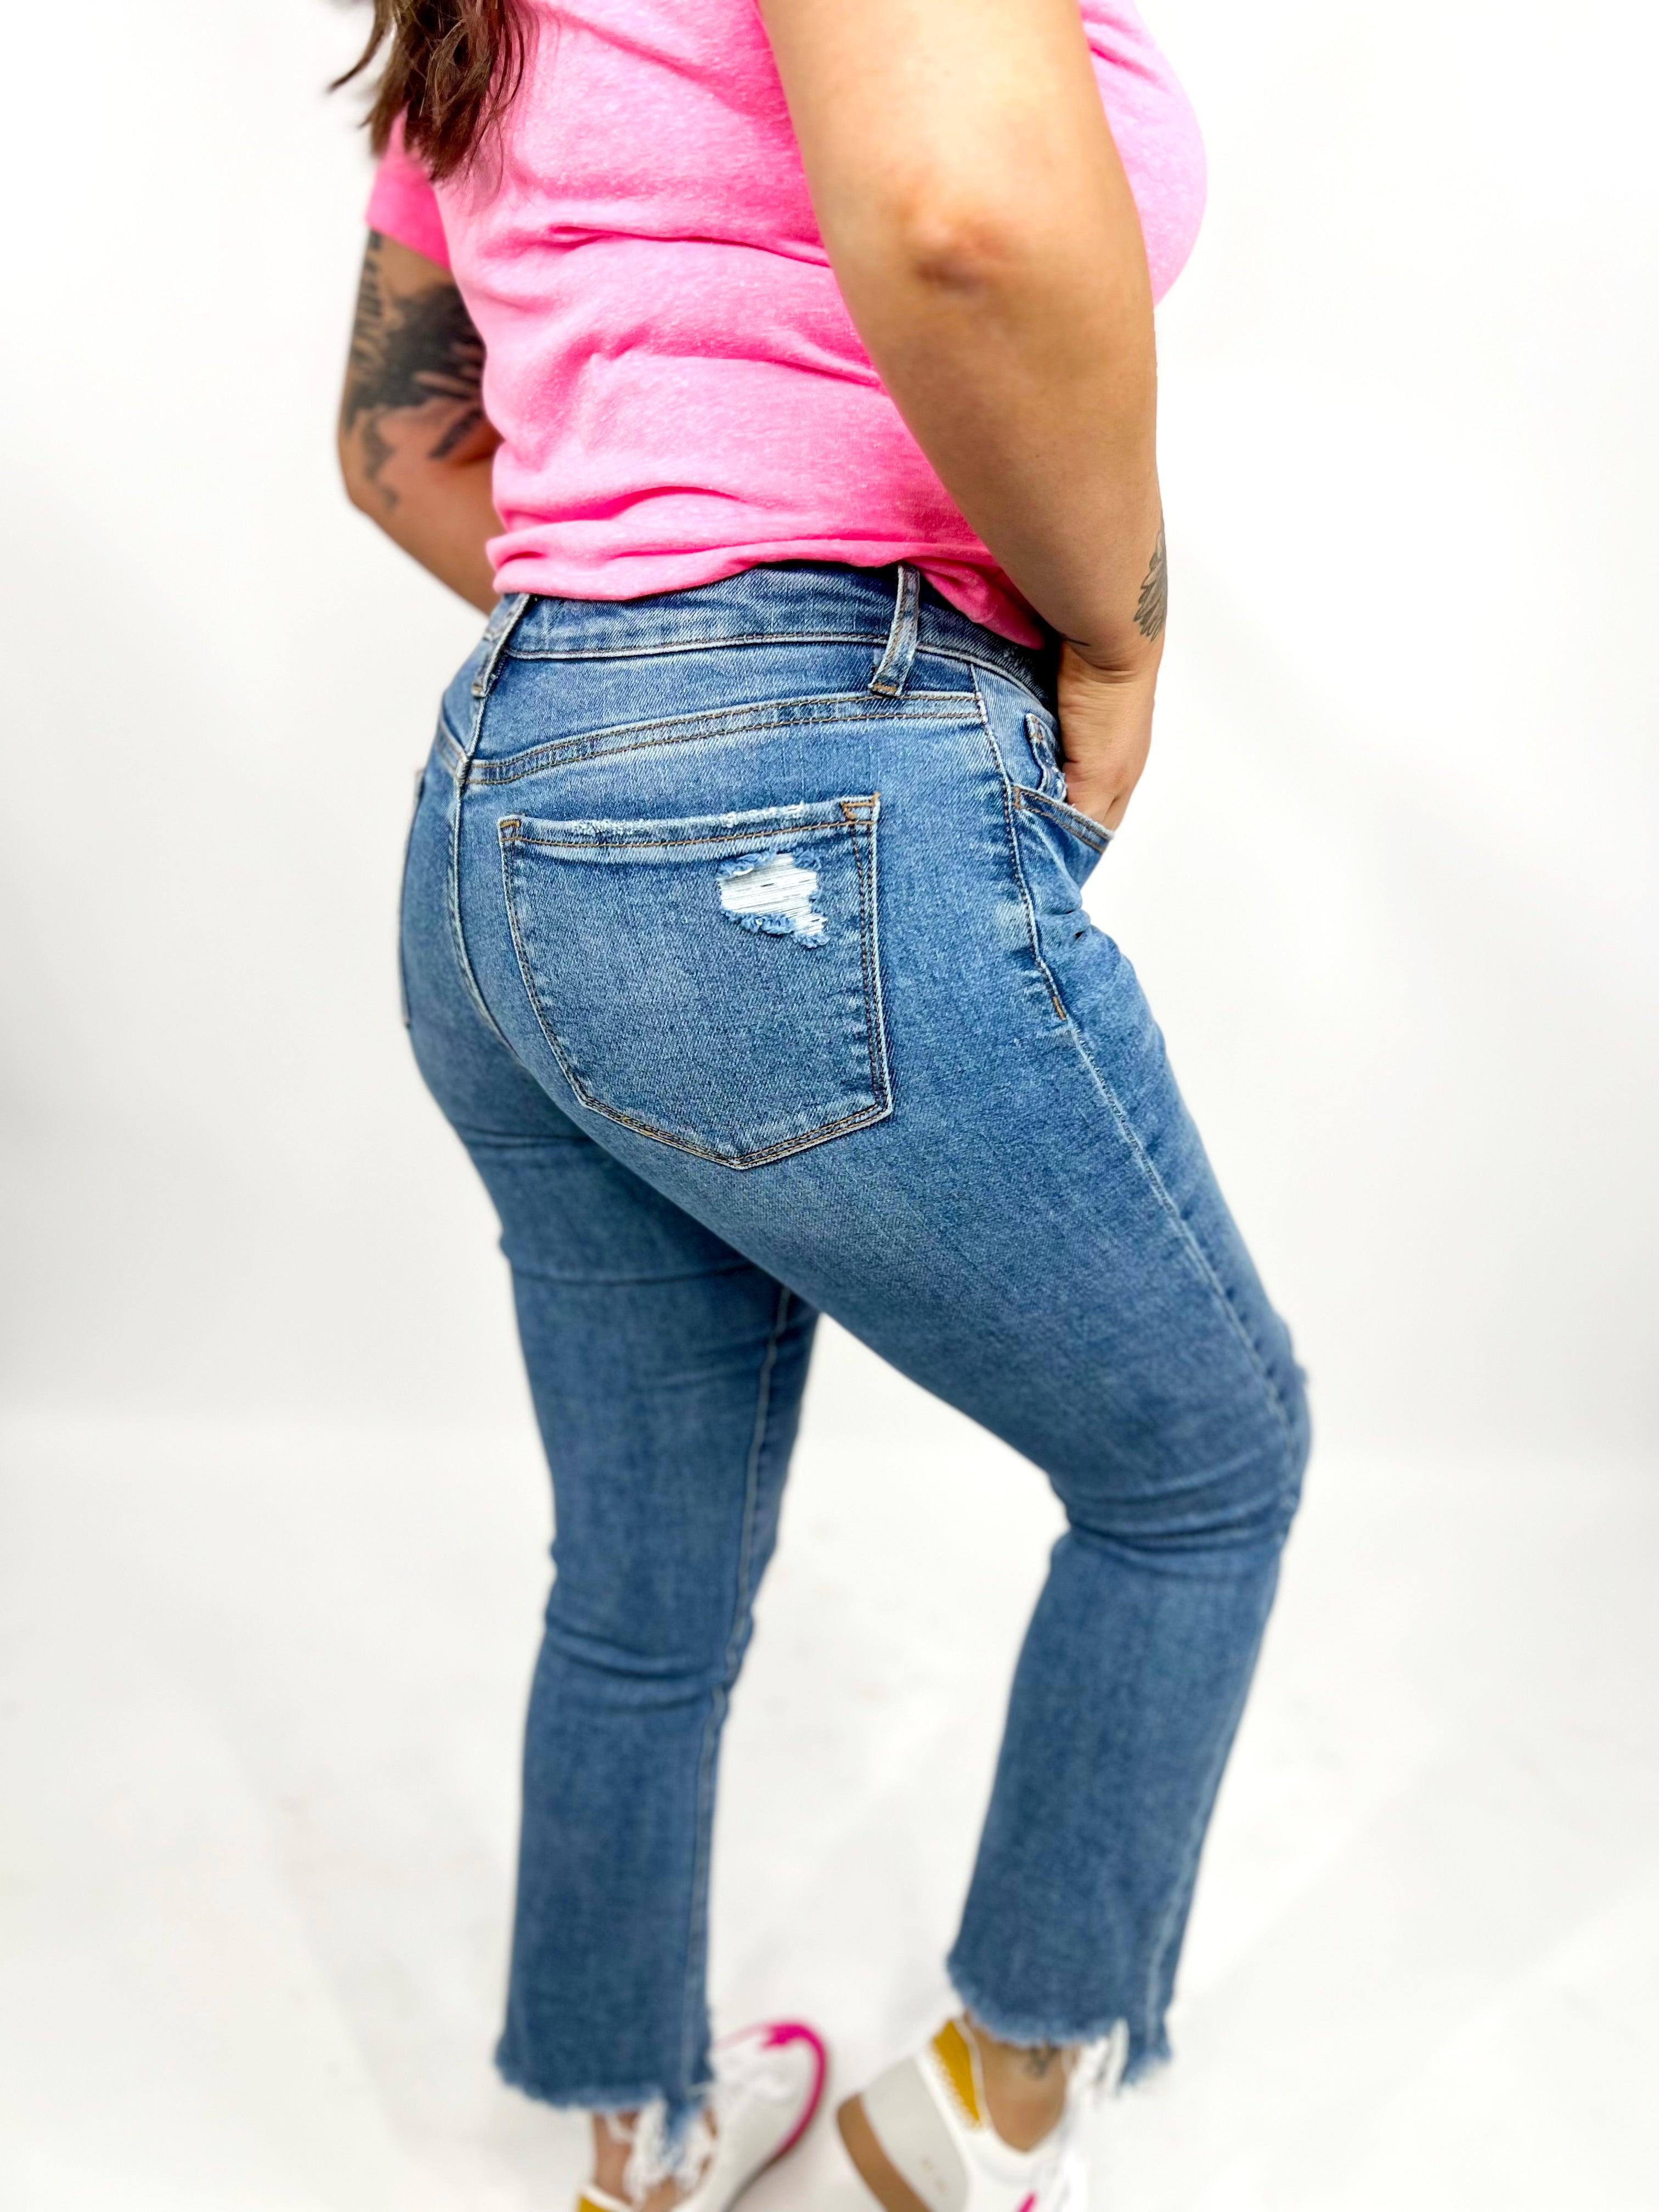 RESTOCK: Empathy Ankle Bootcut Jeans by Lovervet-190 Jeans-Vervet-Heathered Boho Boutique, Women's Fashion and Accessories in Palmetto, FL